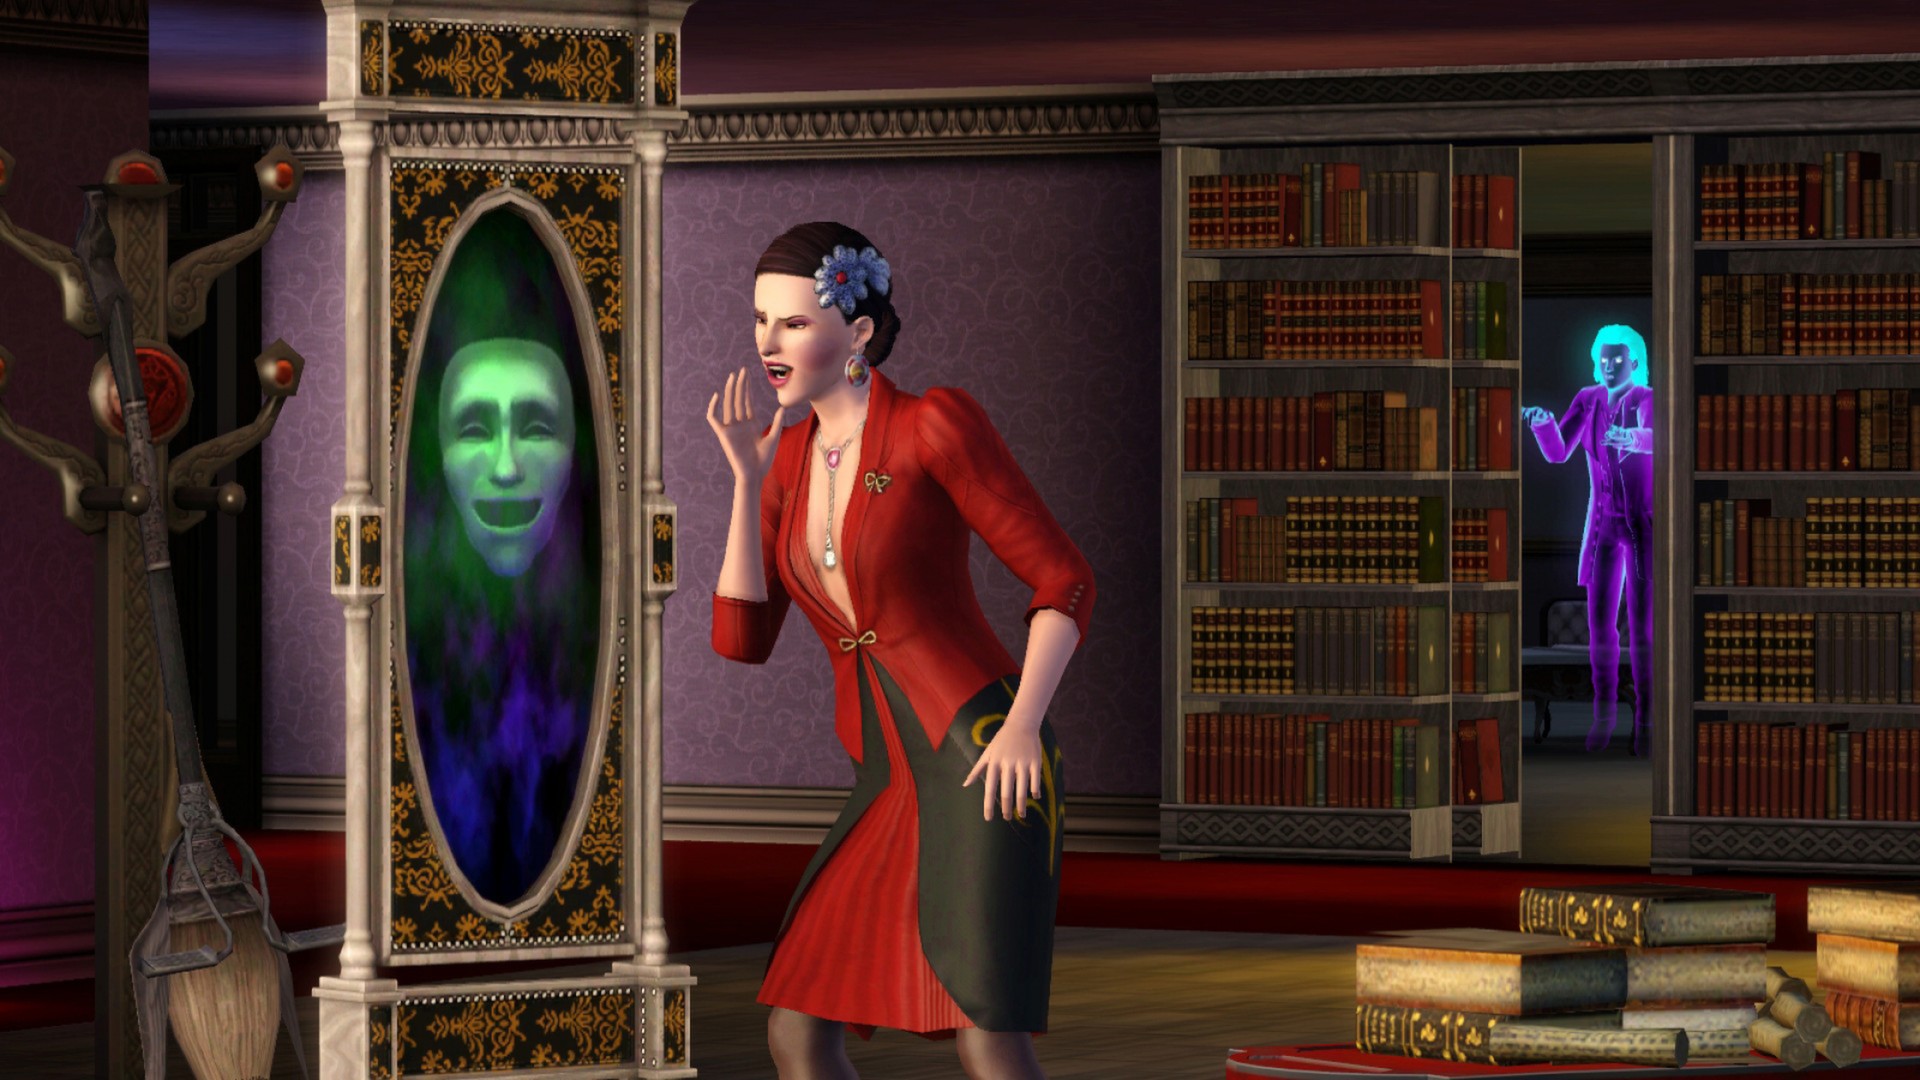 The Sims 3 Supernatural On Steam